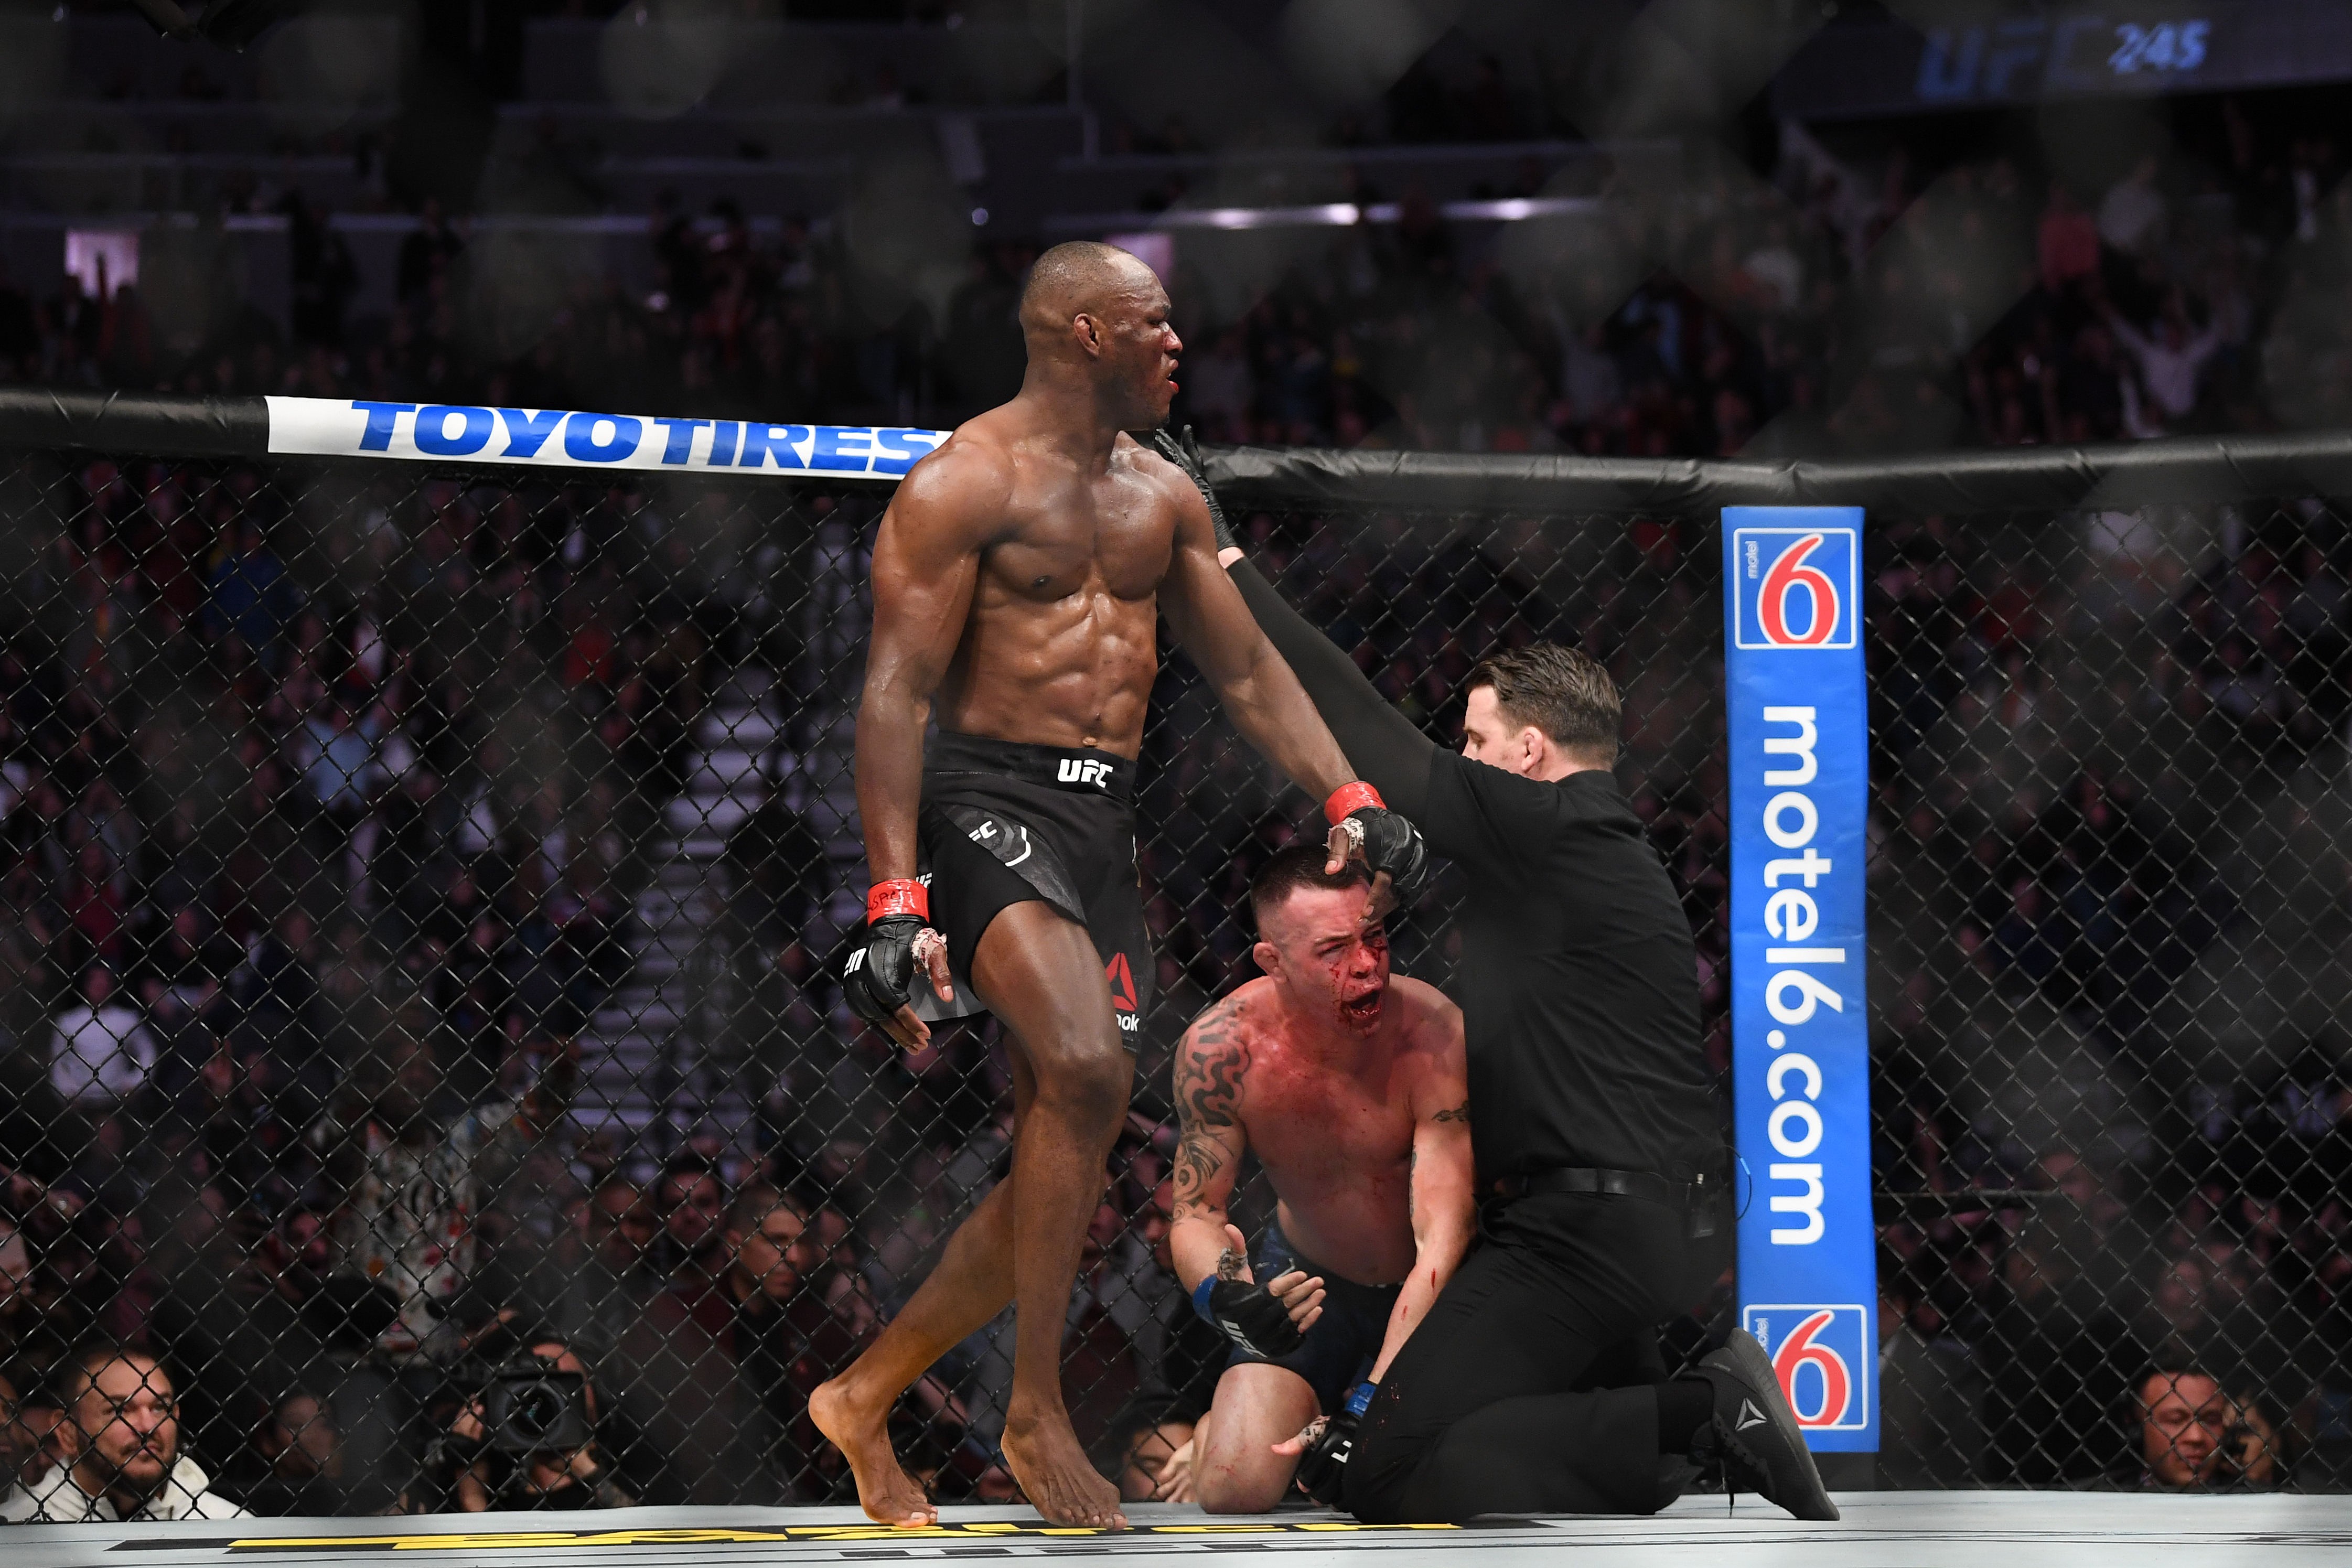 Kamaru Usman walks off as referee Marc Goddard stops his bout against Colby Covington at UFC 245. Photo: USA TODAY Sports